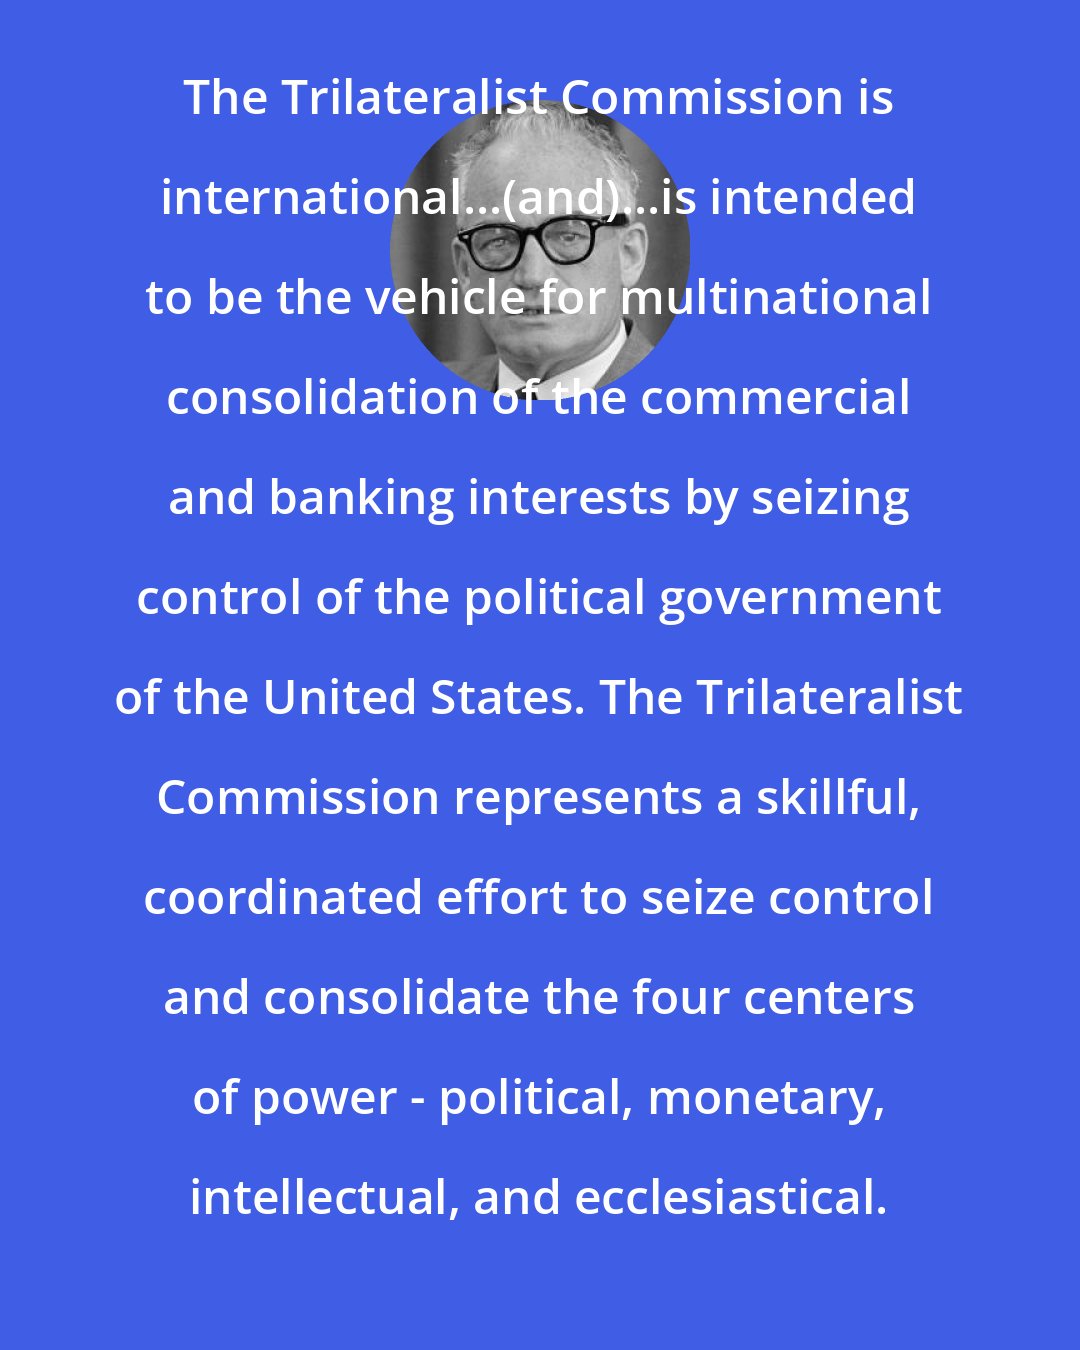 Barry Goldwater: The Trilateralist Commission is international...(and)...is intended to be the vehicle for multinational consolidation of the commercial and banking interests by seizing control of the political government of the United States. The Trilateralist Commission represents a skillful, coordinated effort to seize control and consolidate the four centers of power - political, monetary, intellectual, and ecclesiastical.